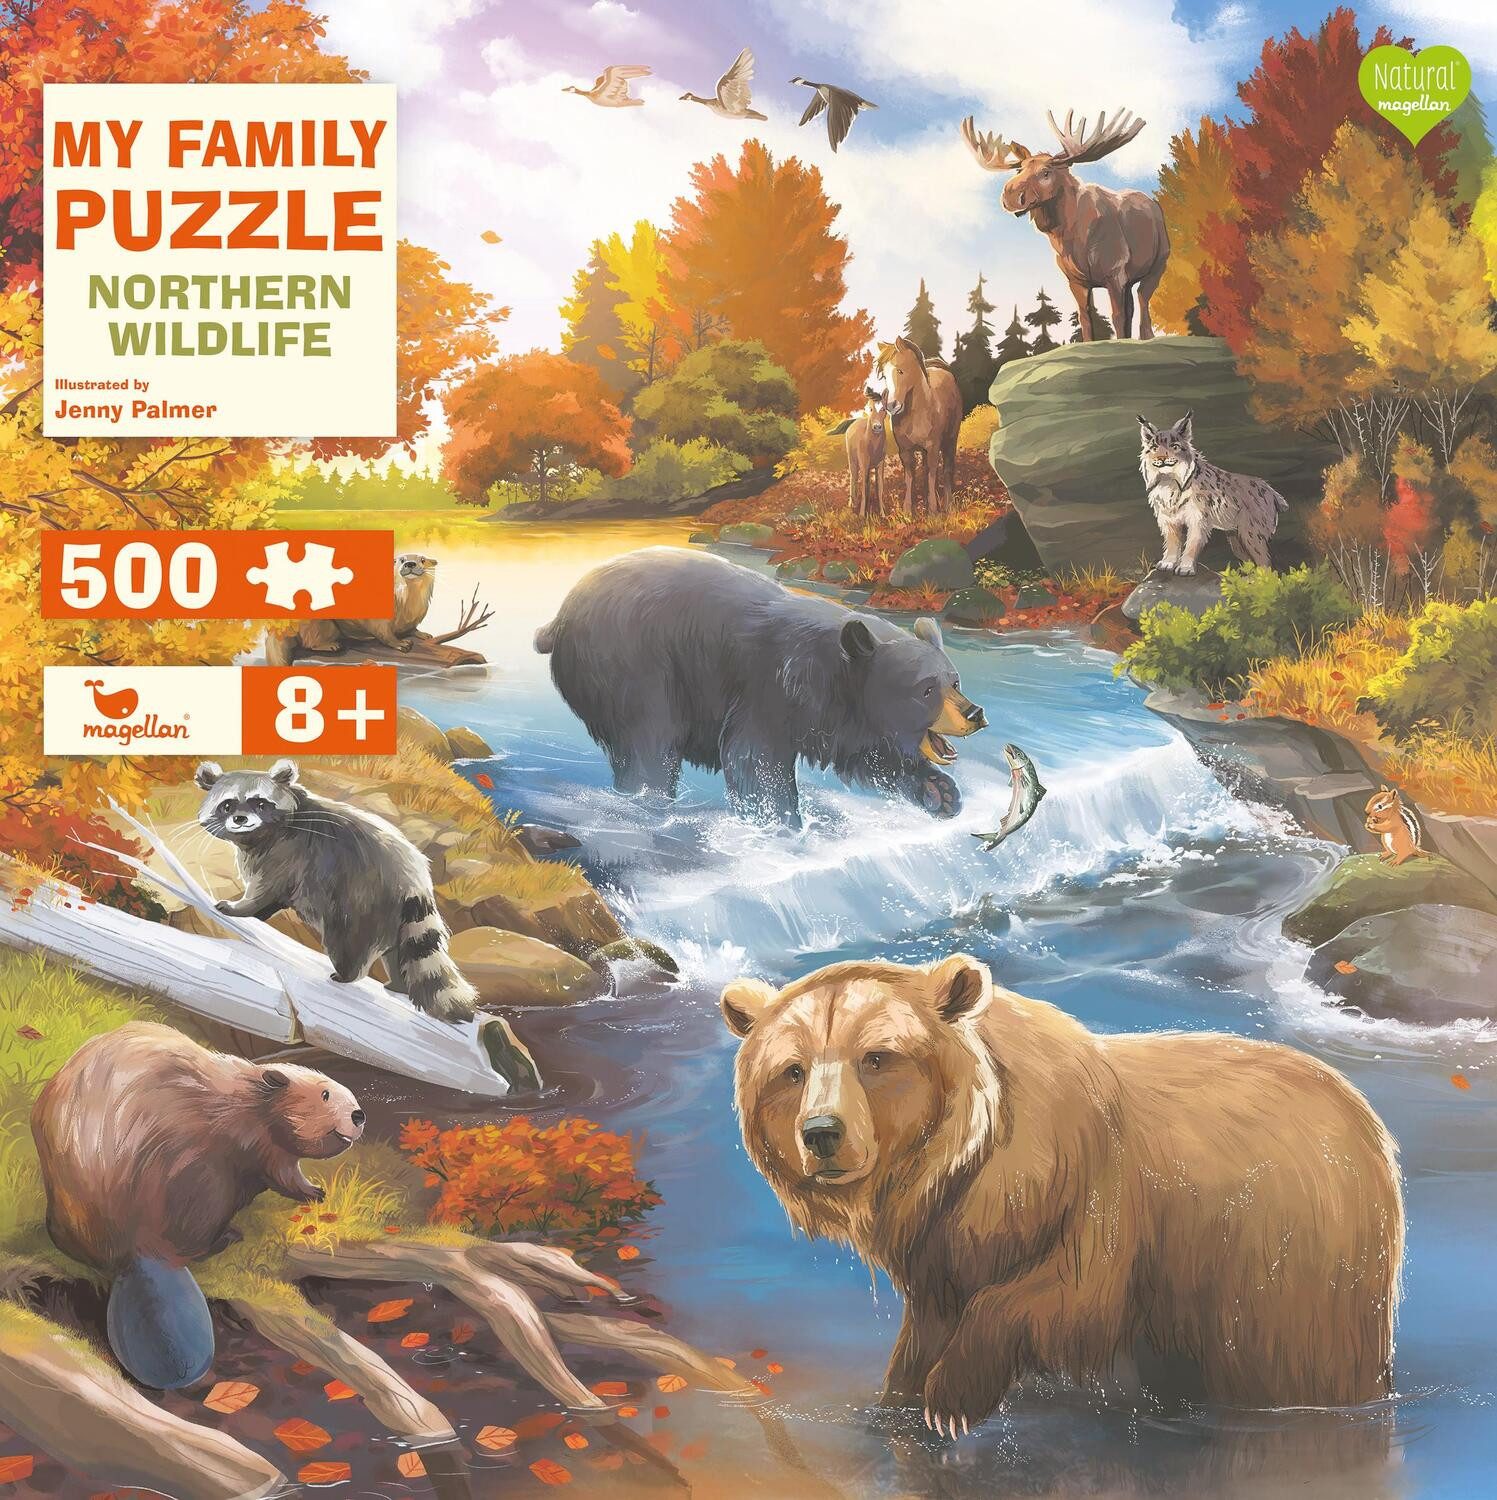 Magellan Puzzle My Family Puzzle - Northern Wildlife 500 Teile, 500 Puzzleteile